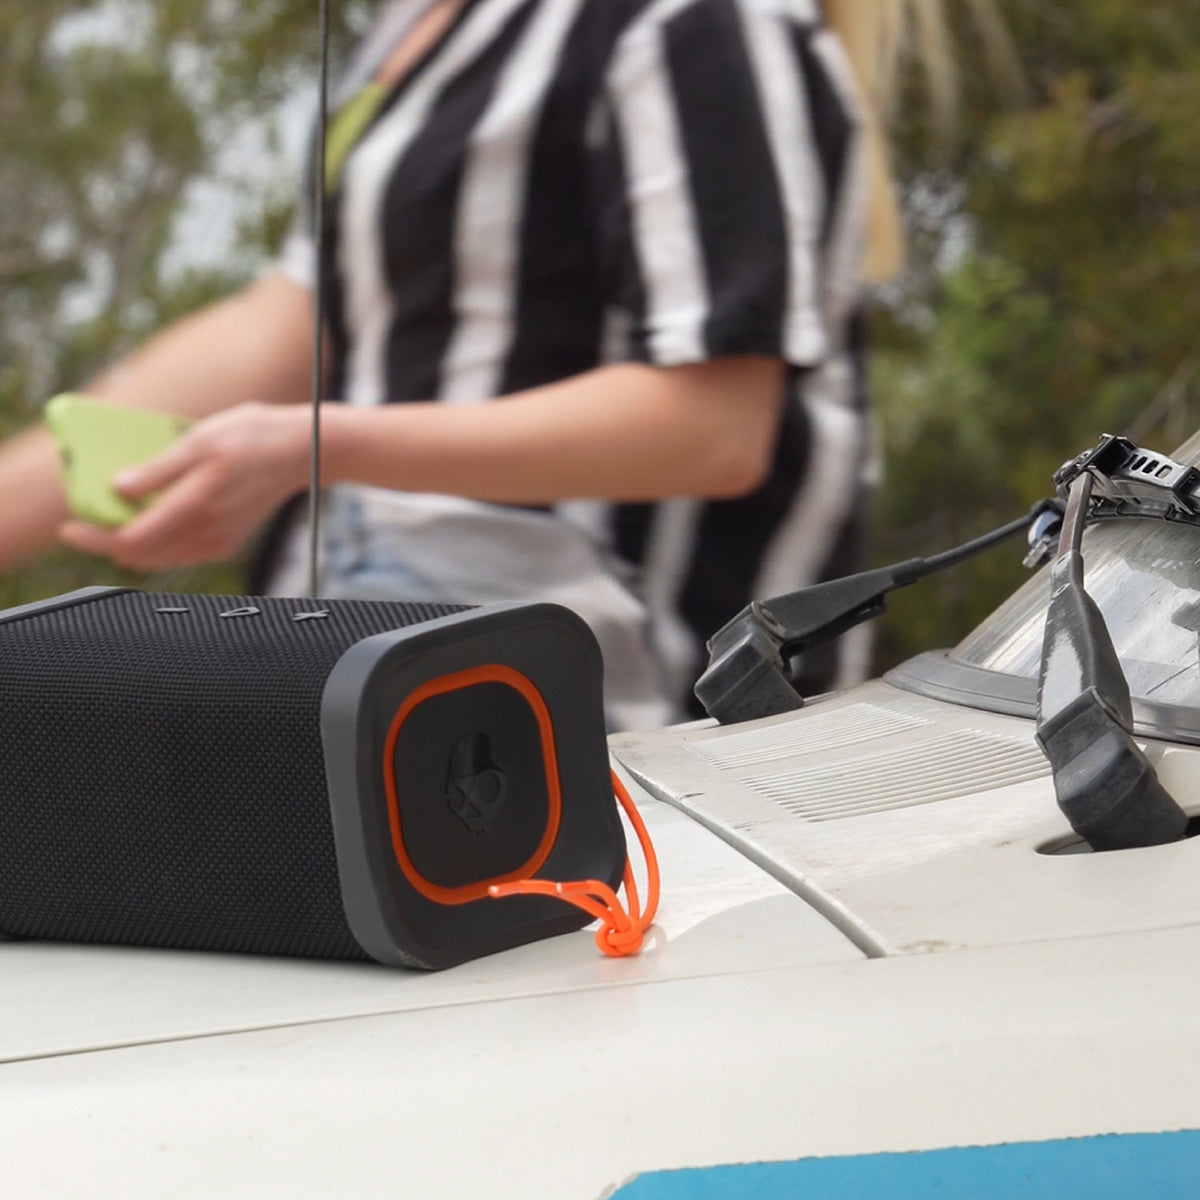 Meet Terrain Wireless Bluetooth Speaker - the new must-have portable audio  device